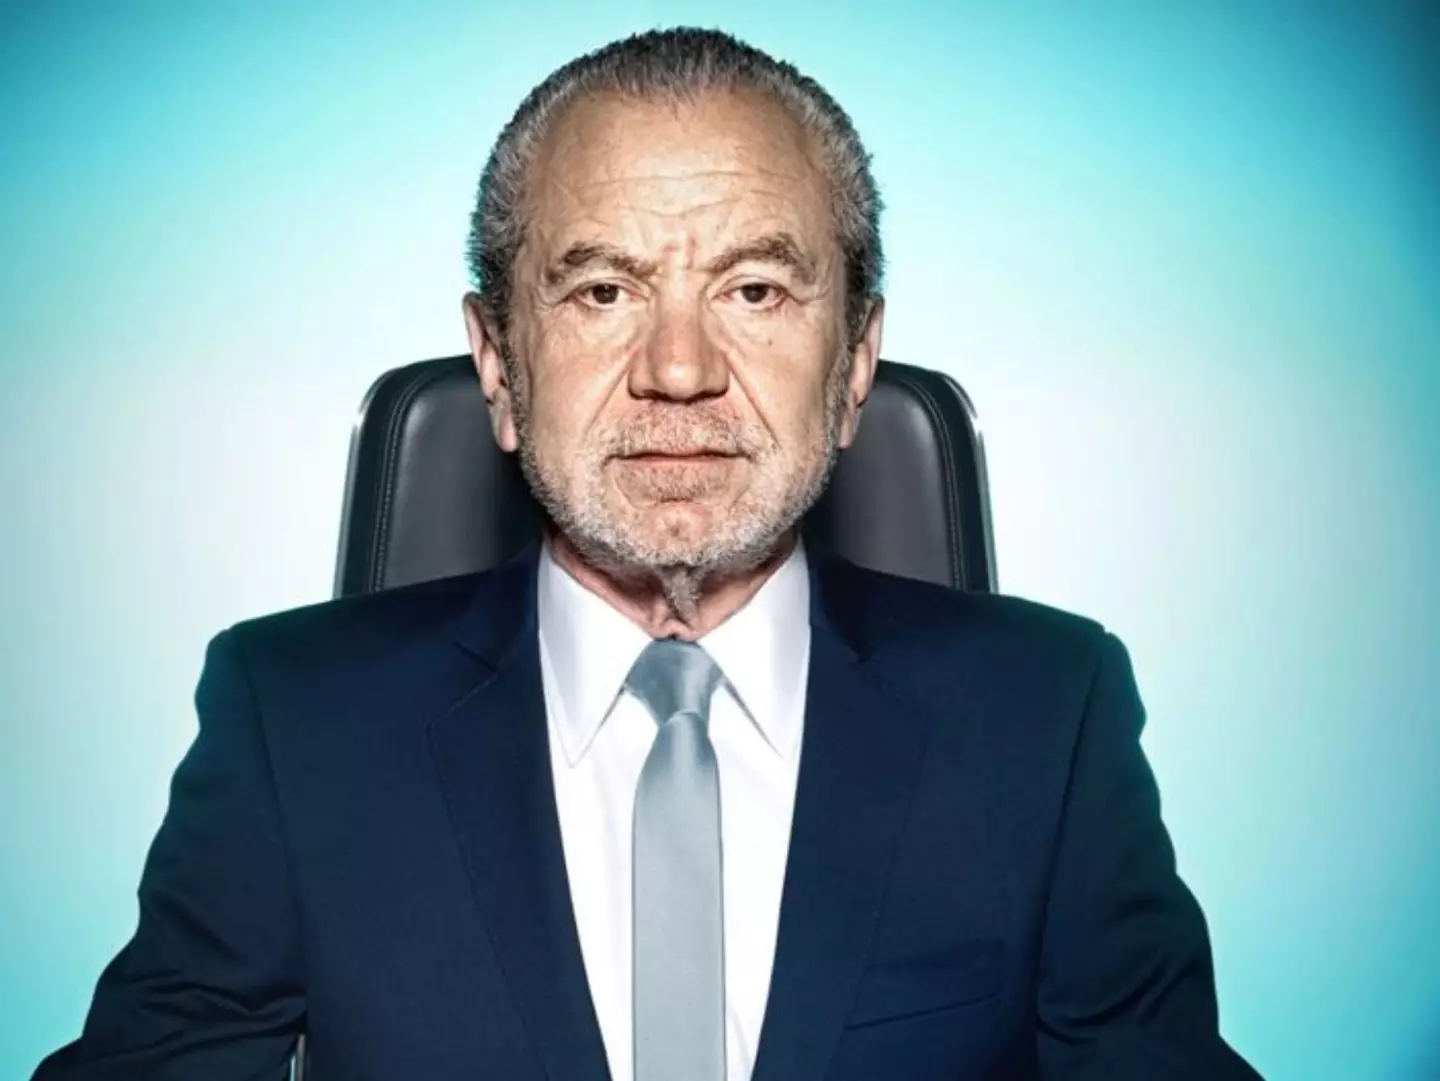 Lord Sugar has spoken about the future of The Apprentice.